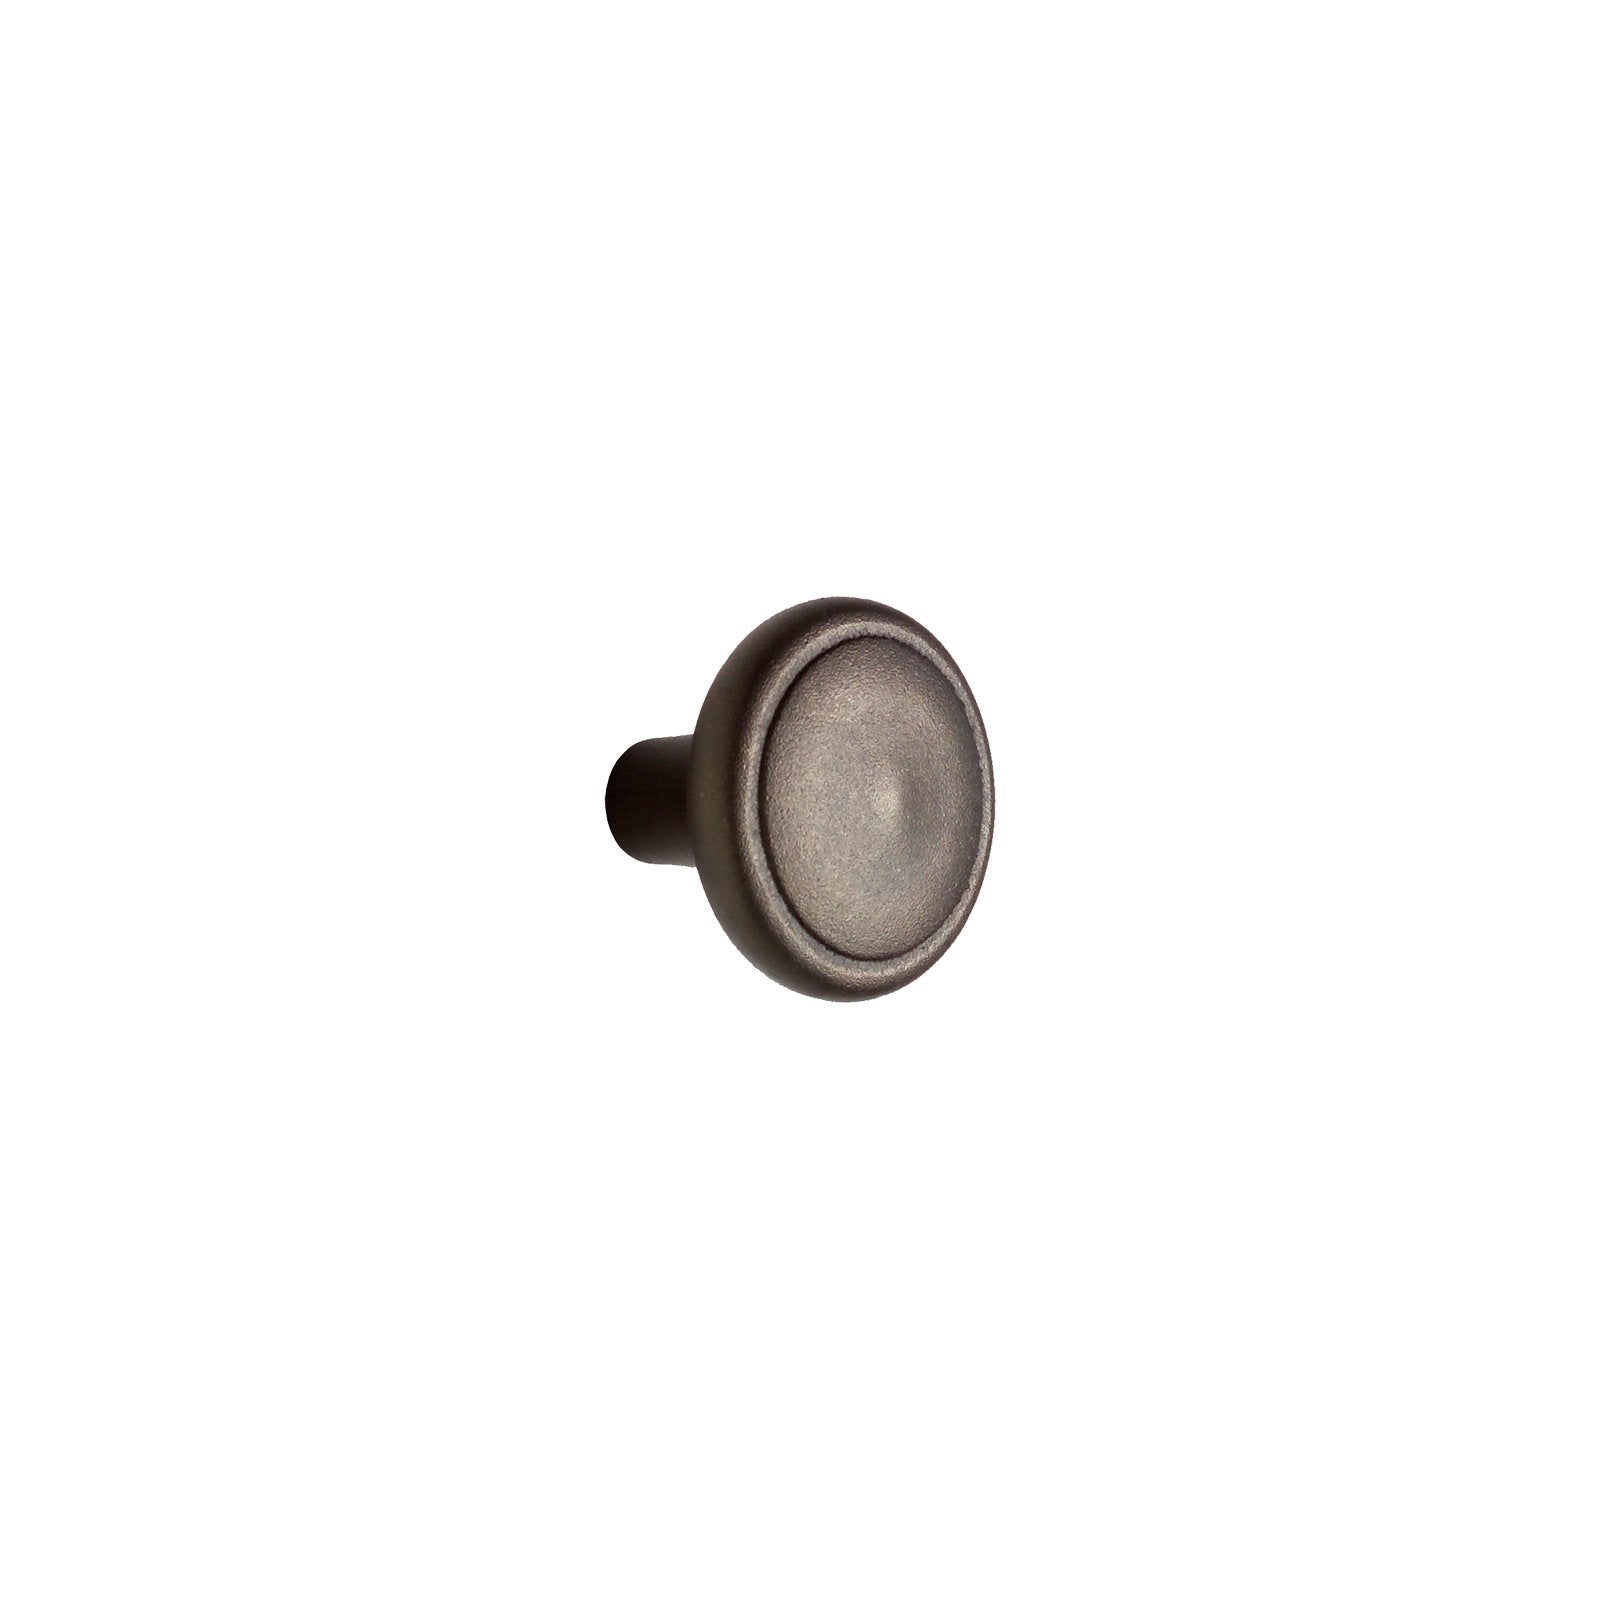 Rocky Mountain Hardware CK254 - 1 7/16" Roswell Cabinet Knob